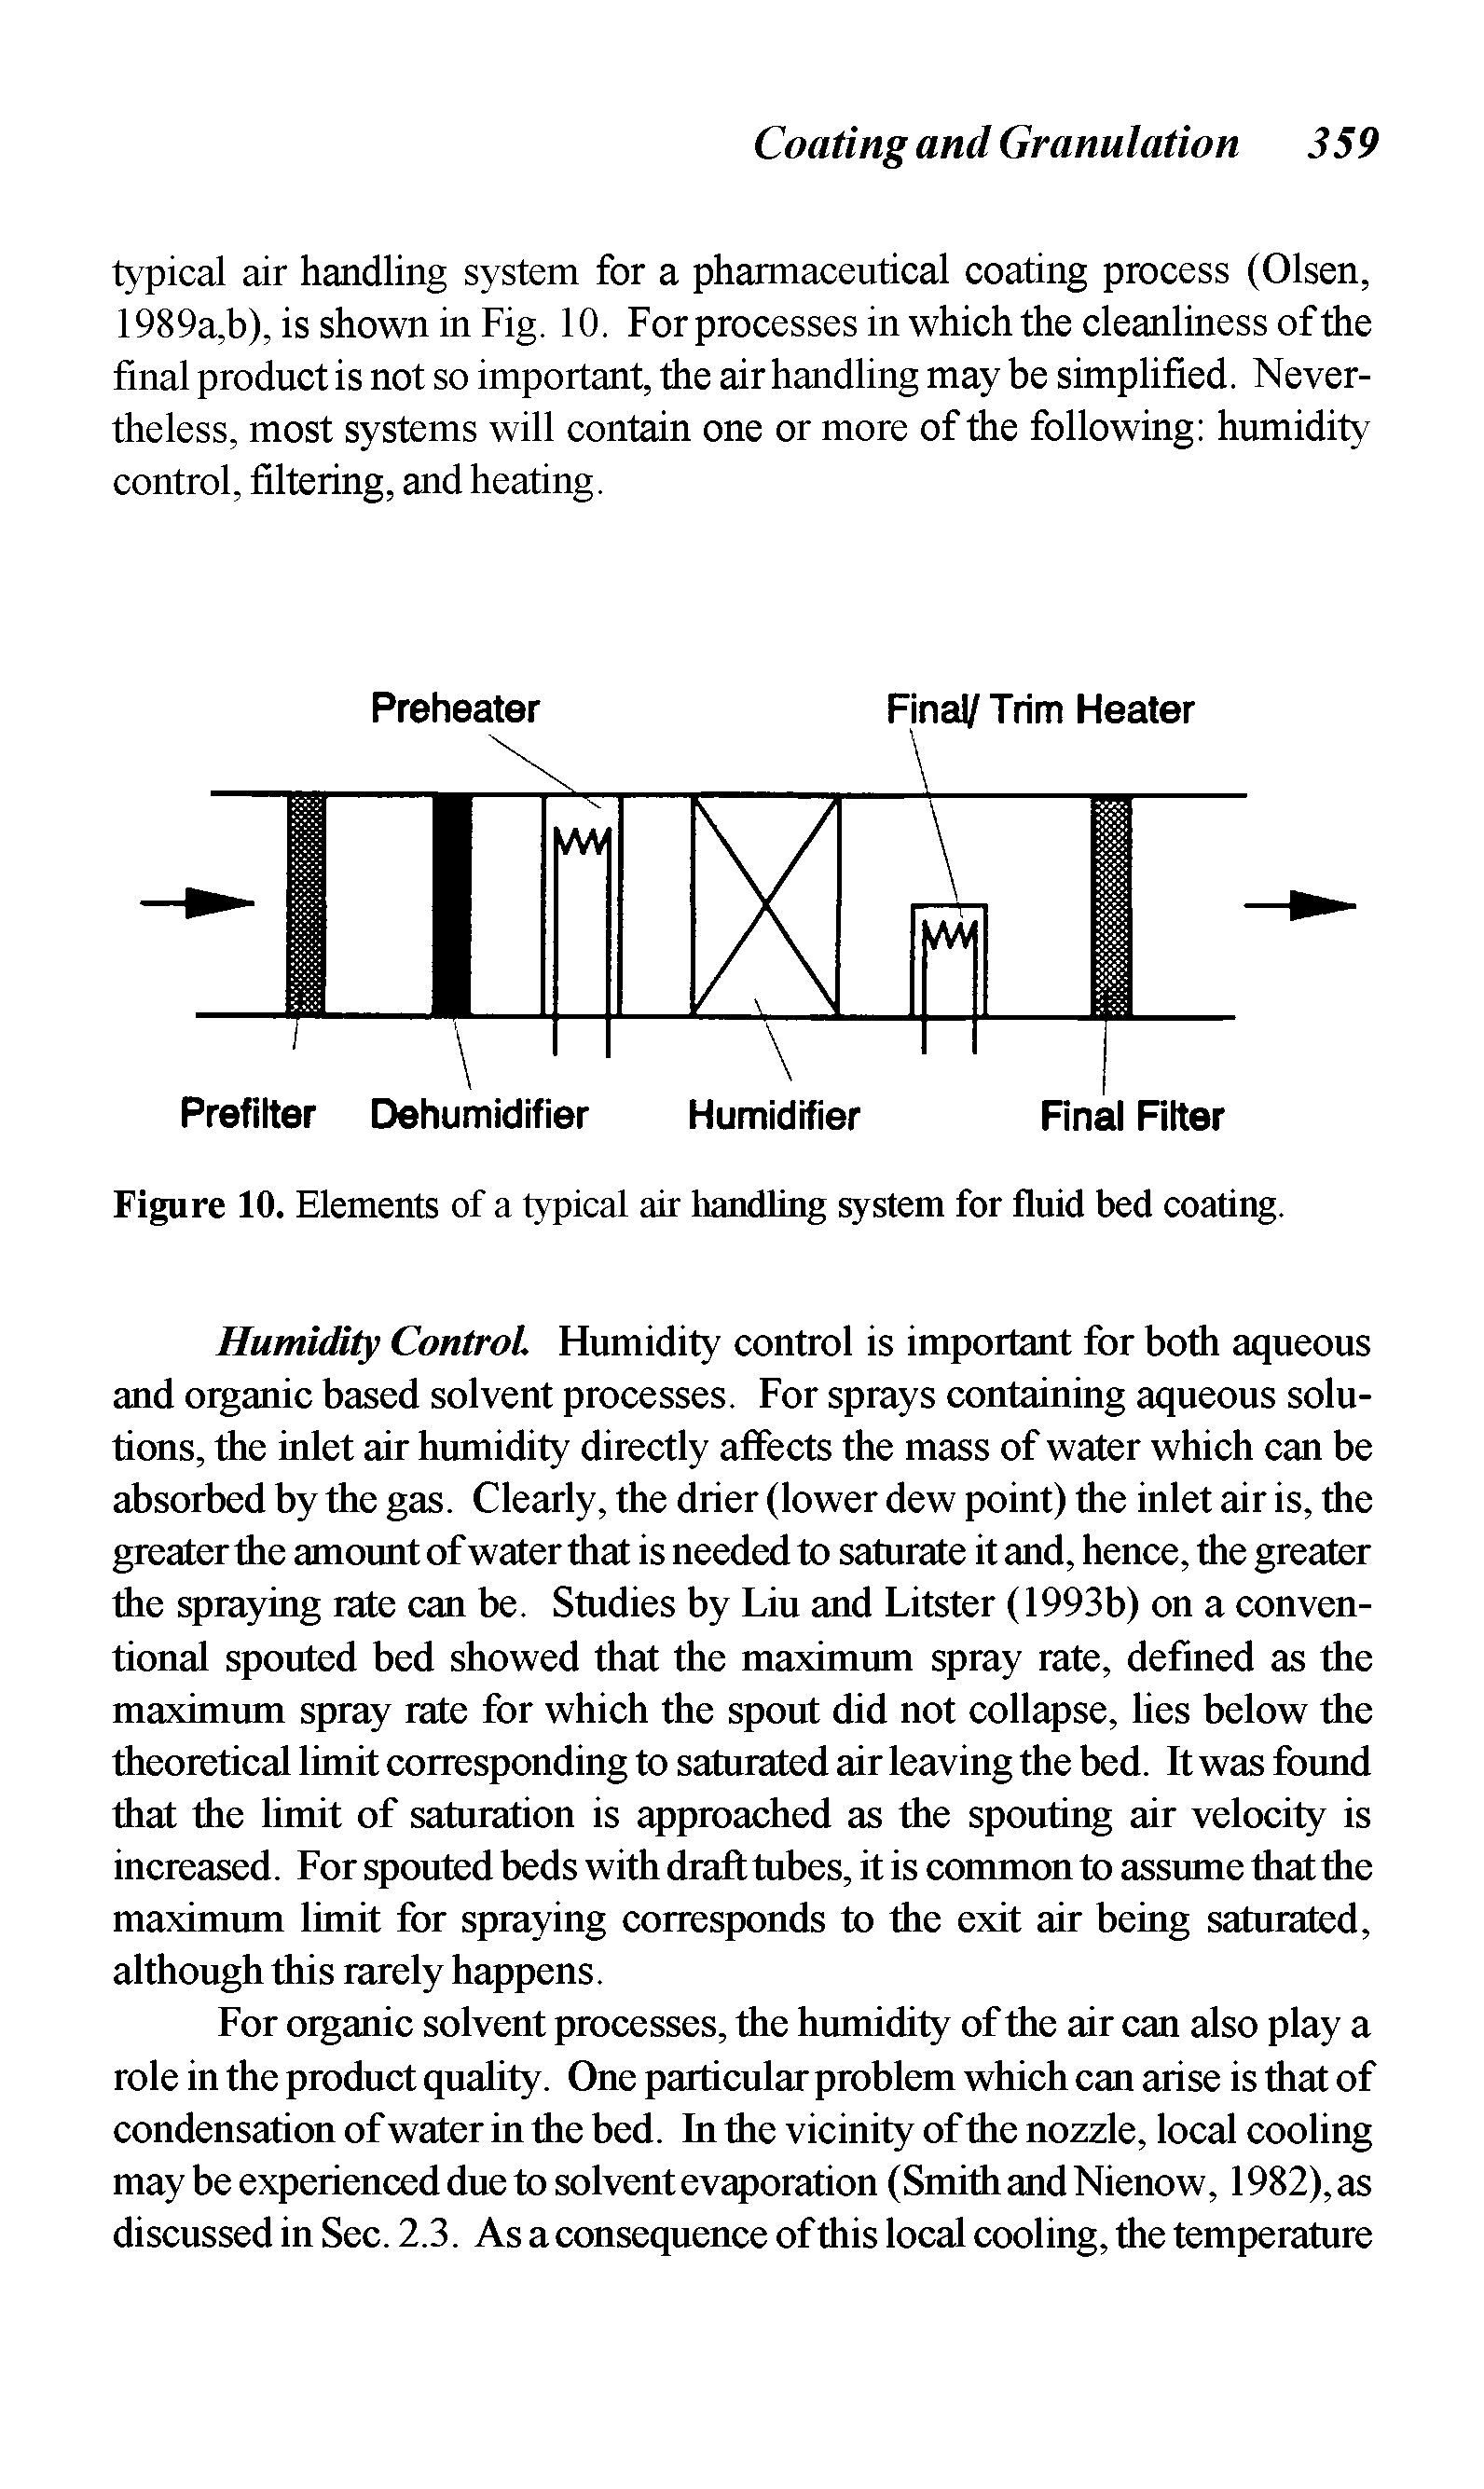 Figure 10. Elements of a typical air handling system for fluid bed coating.